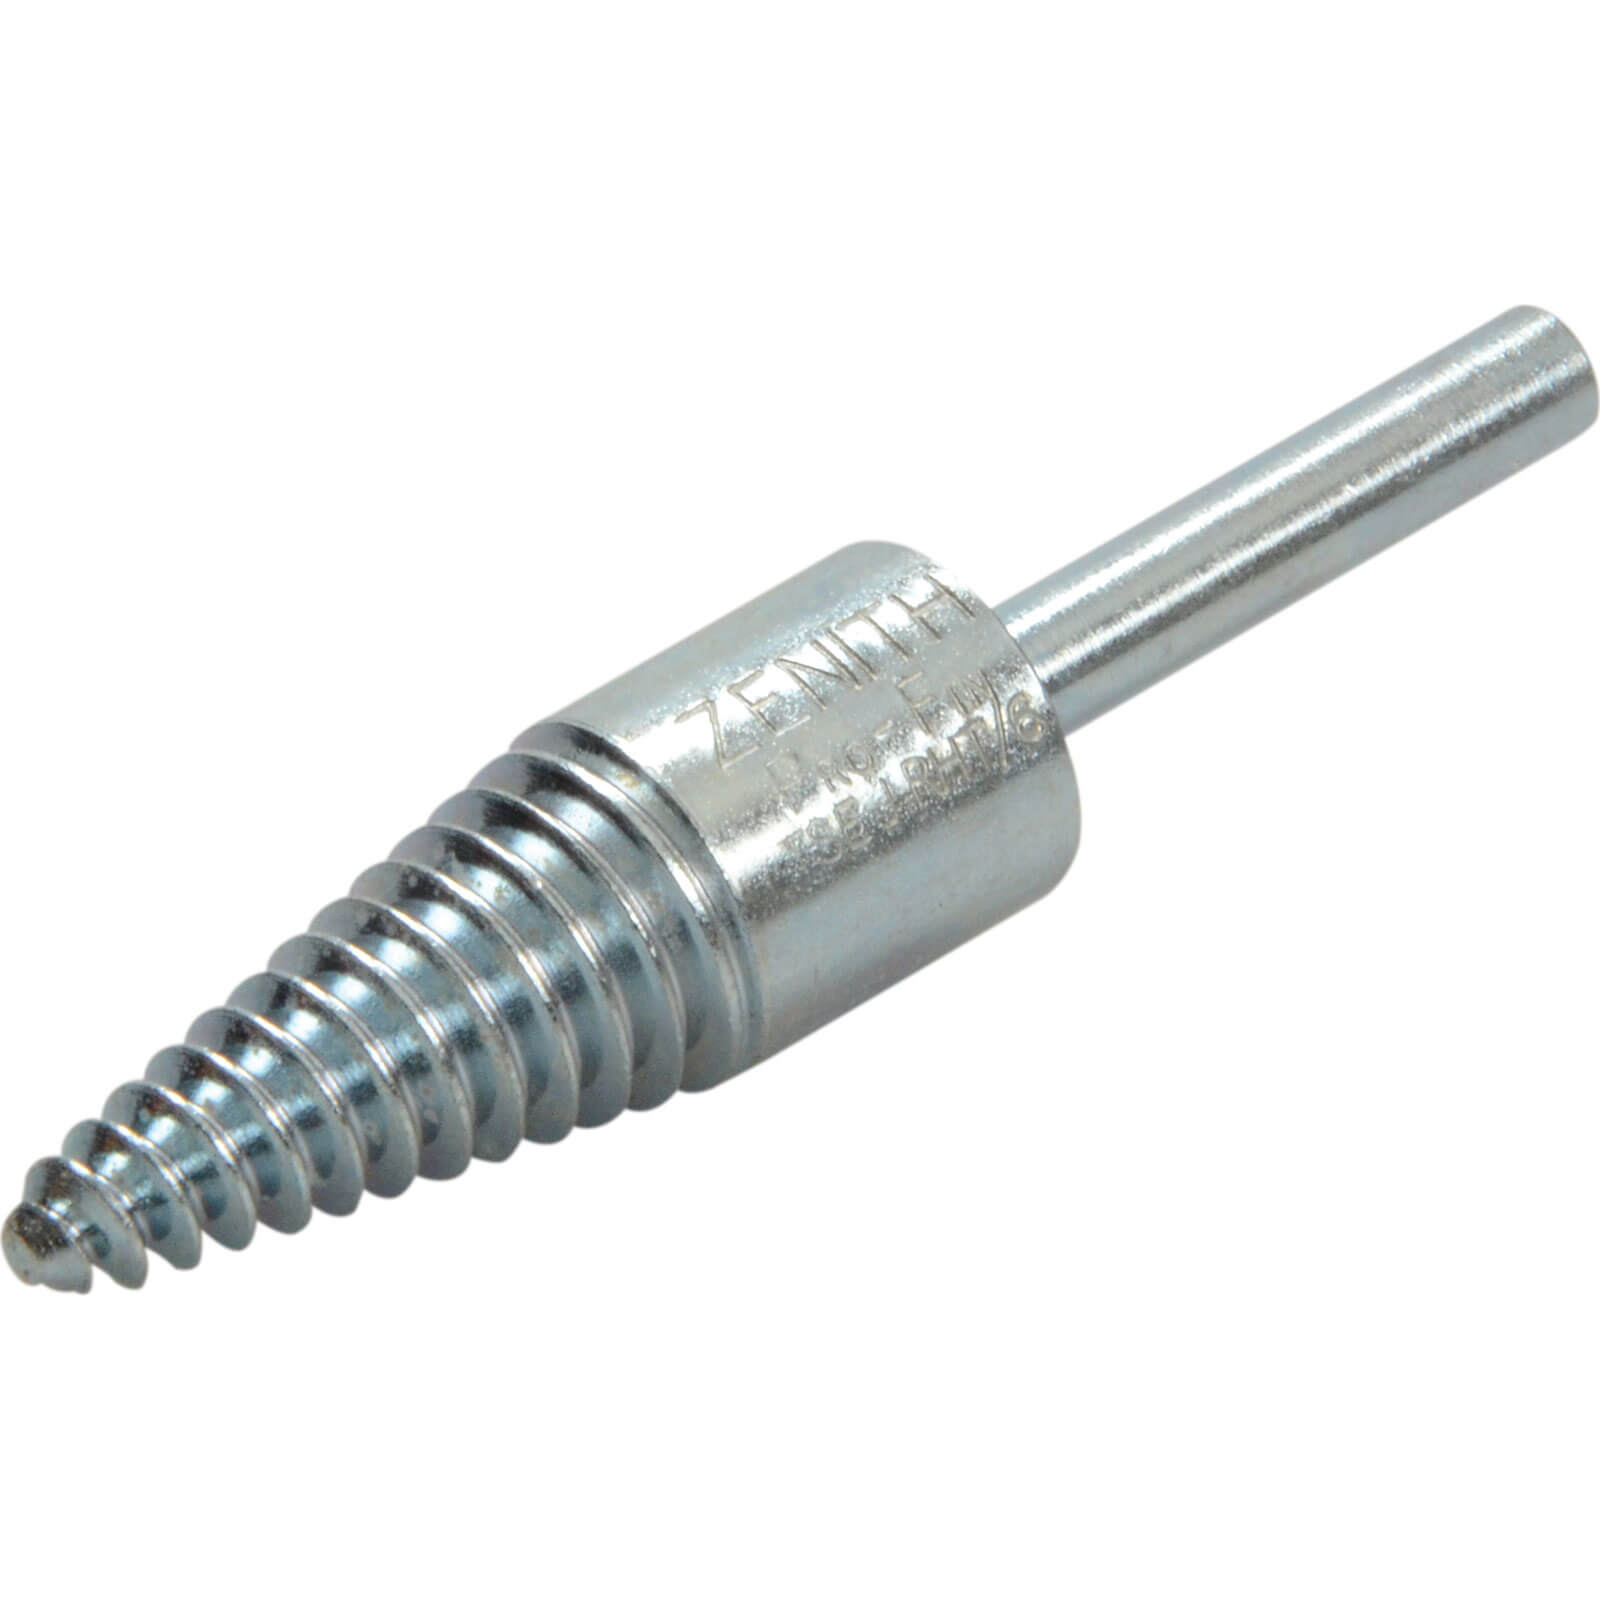 Image of Zenith Profin Taper Spindle